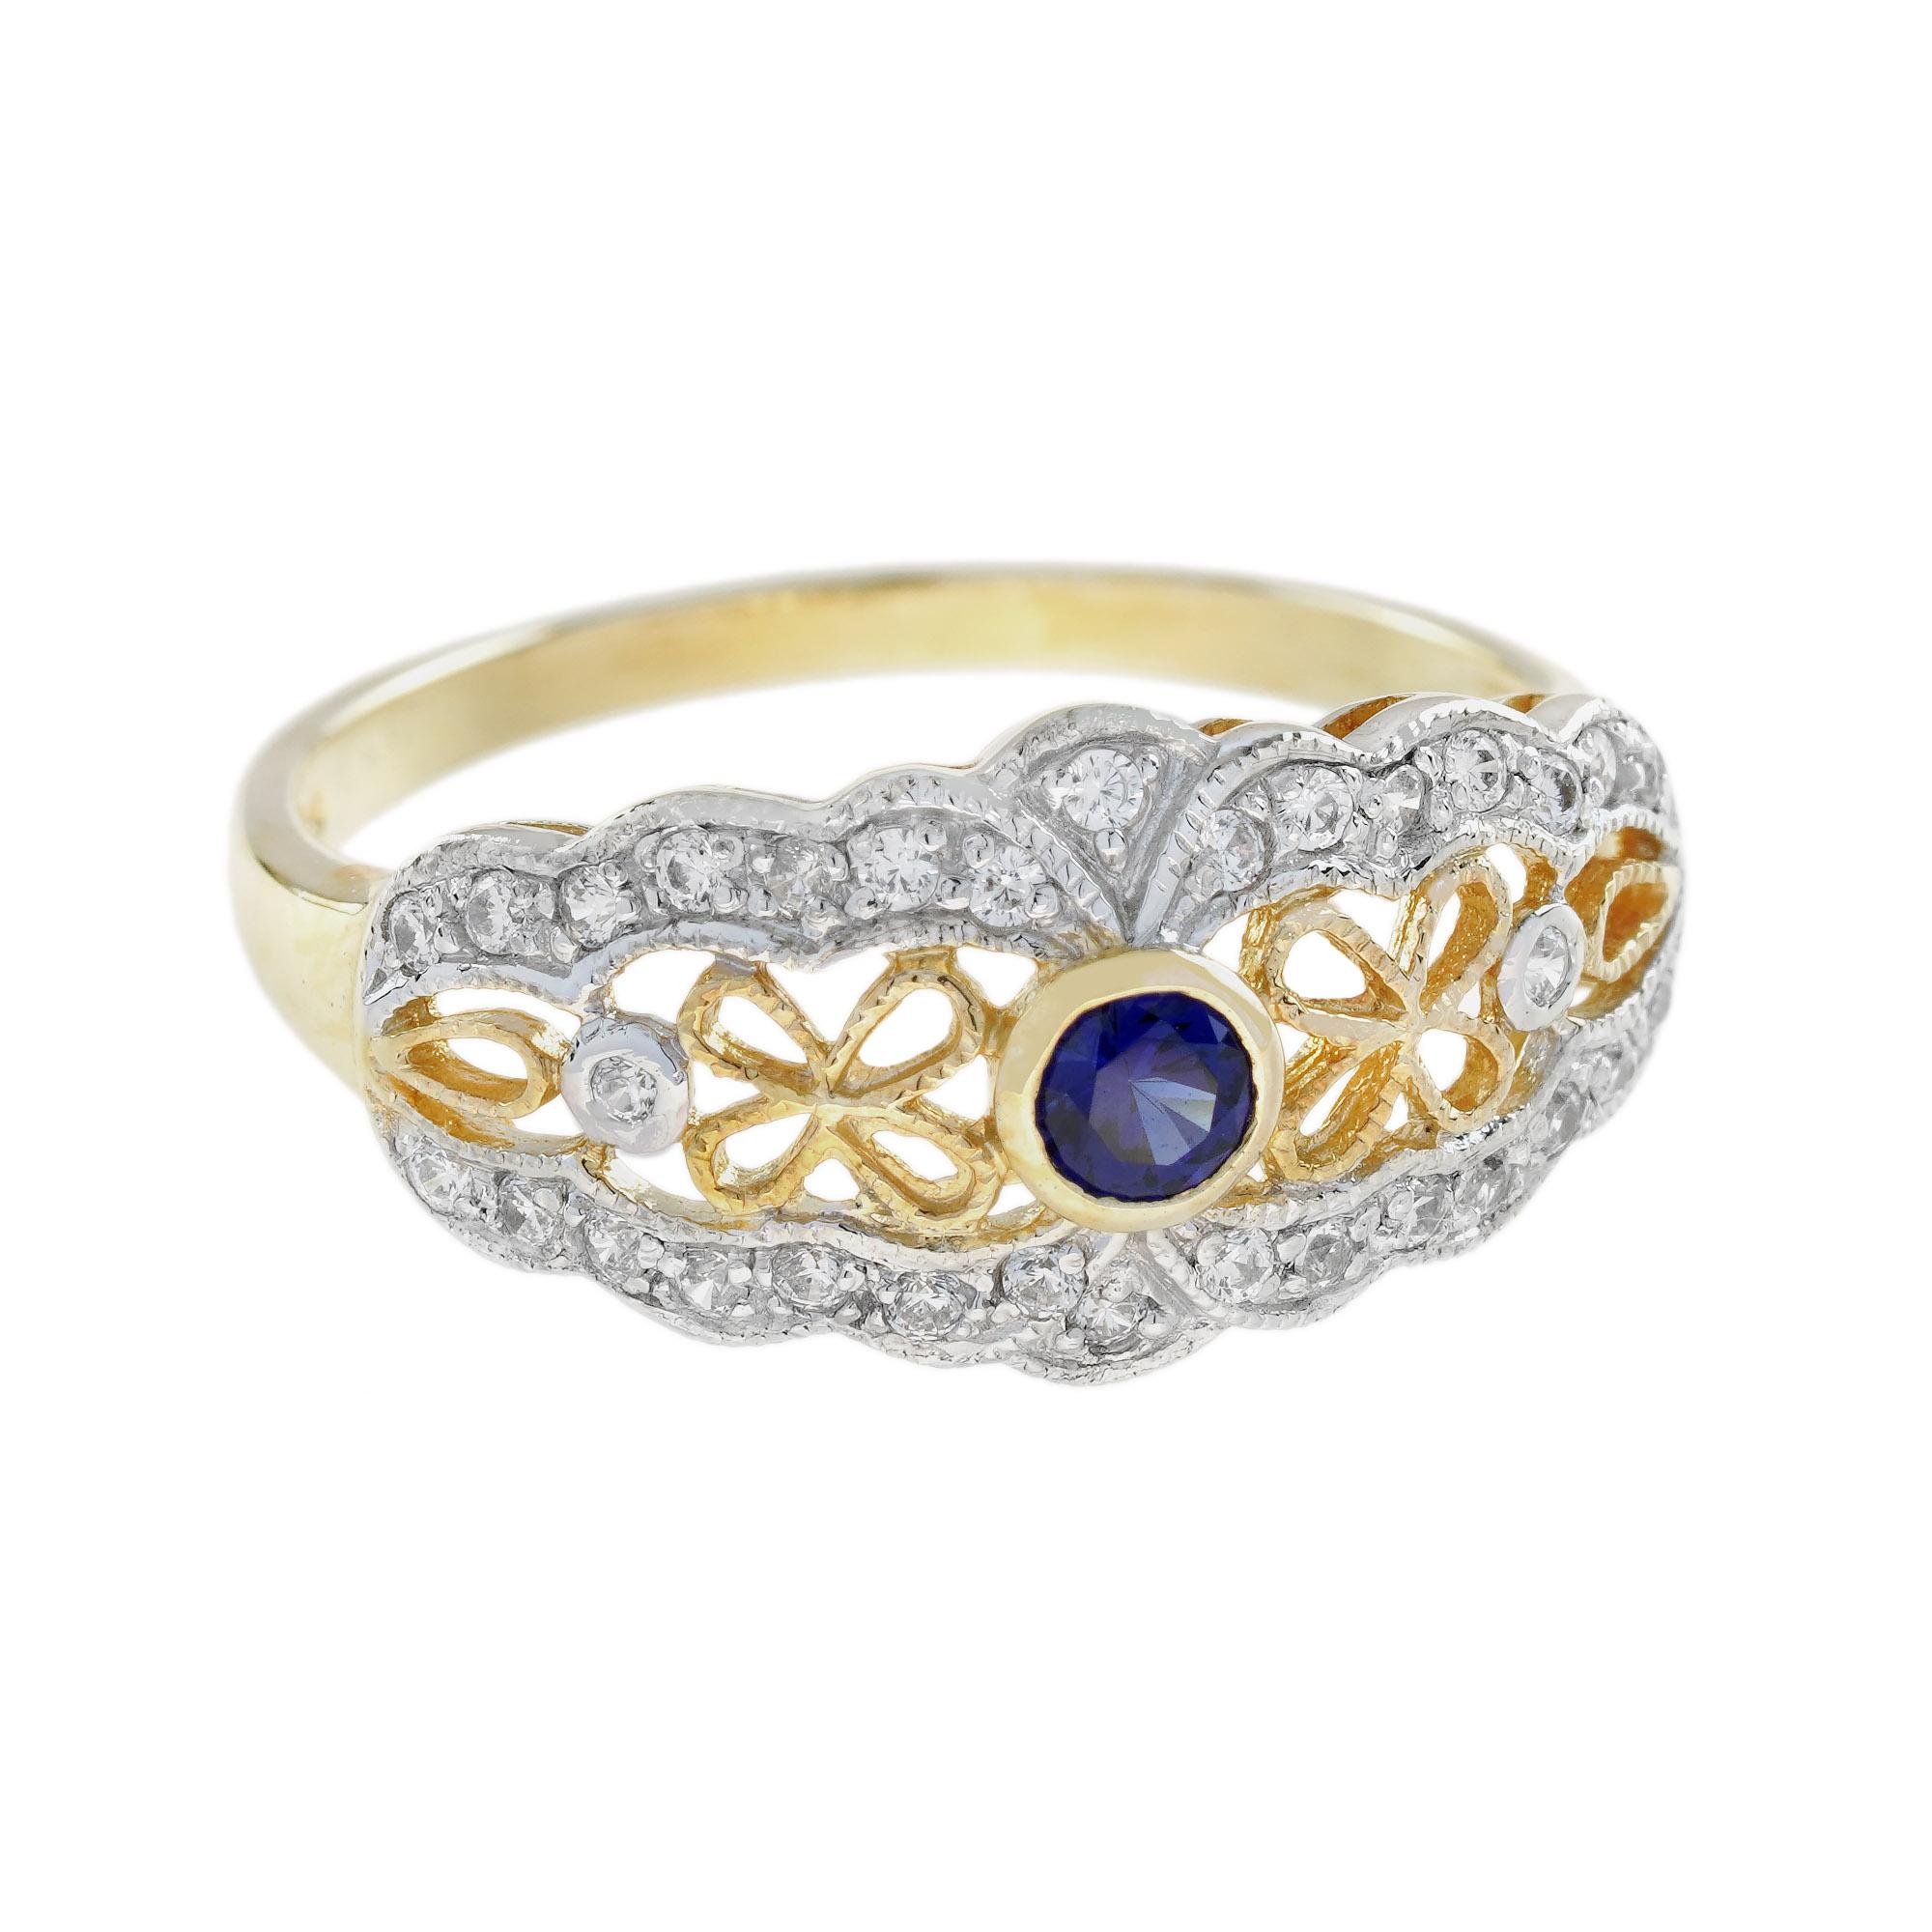 For Sale:  Blue Sapphire and Diamond Vintage Style Filigree Ring in 14K Two Tone Gold 3